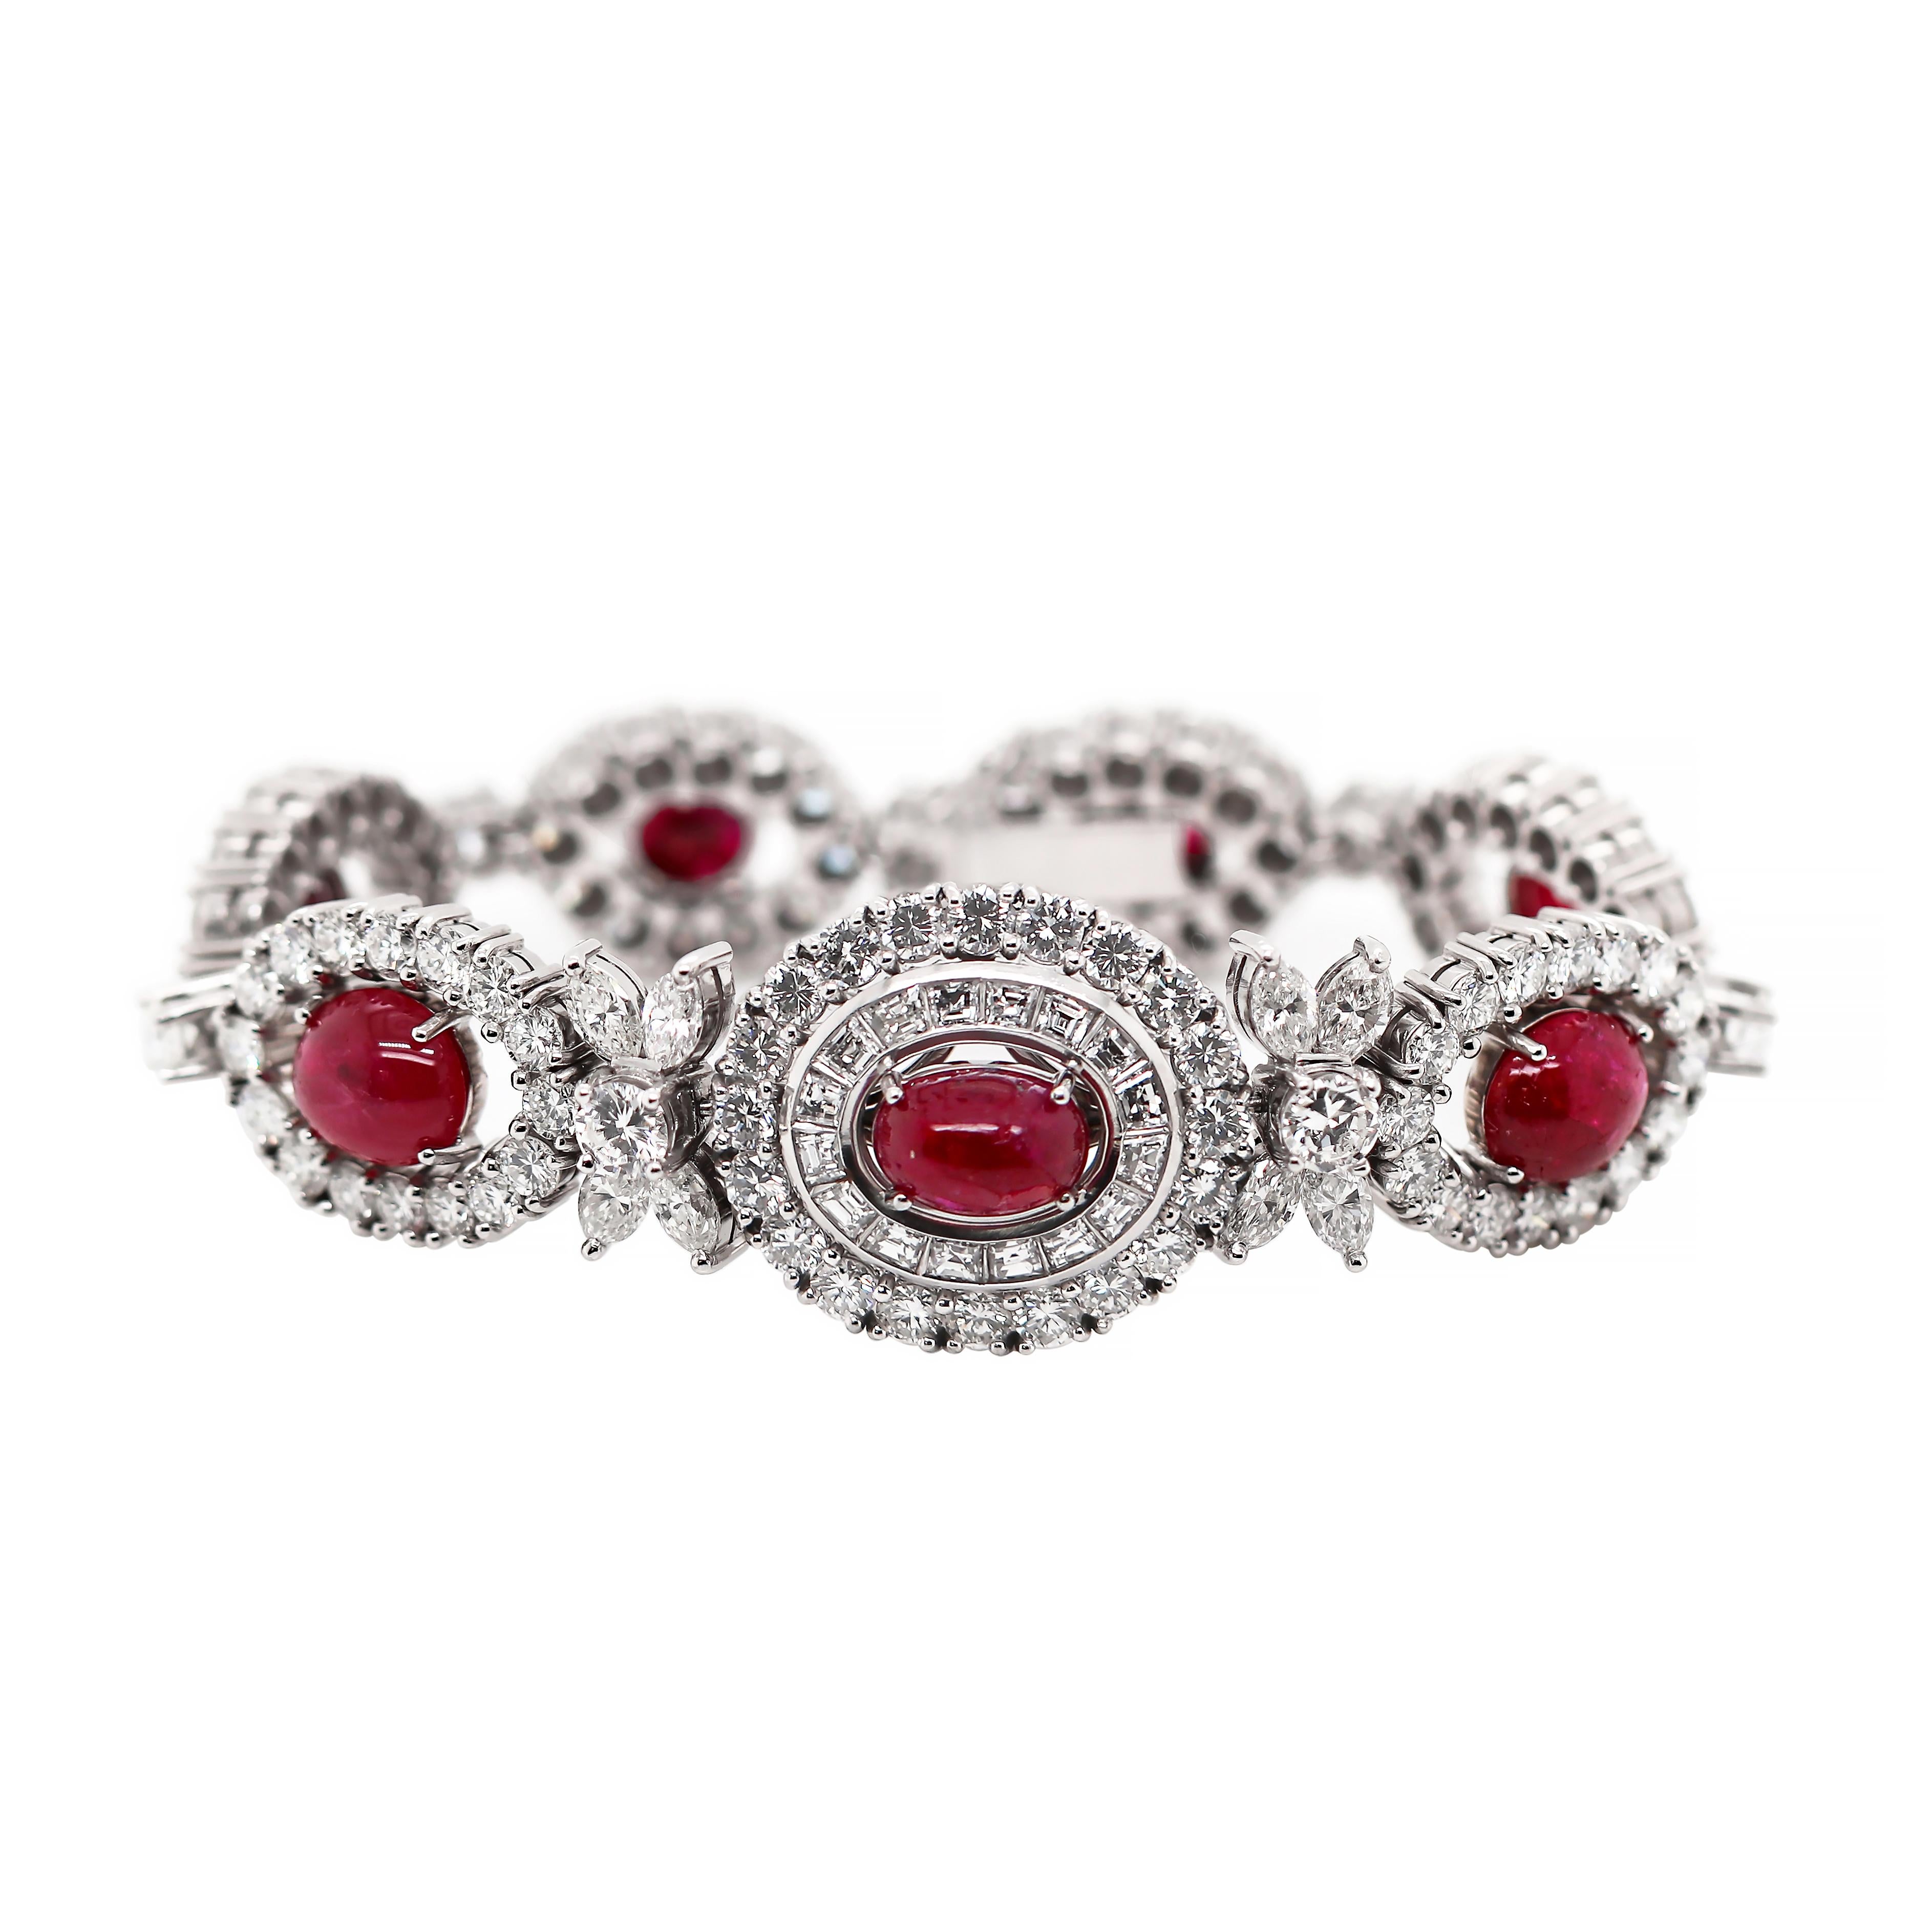 Exceptional vintage bracelet featuring  seven oval cabochon cherry red rubies weighing approximately 20.00 carat total, each beautiful claw set in the center of a diamond halo. The centre section of the bracelet is mounted with a double halo, one